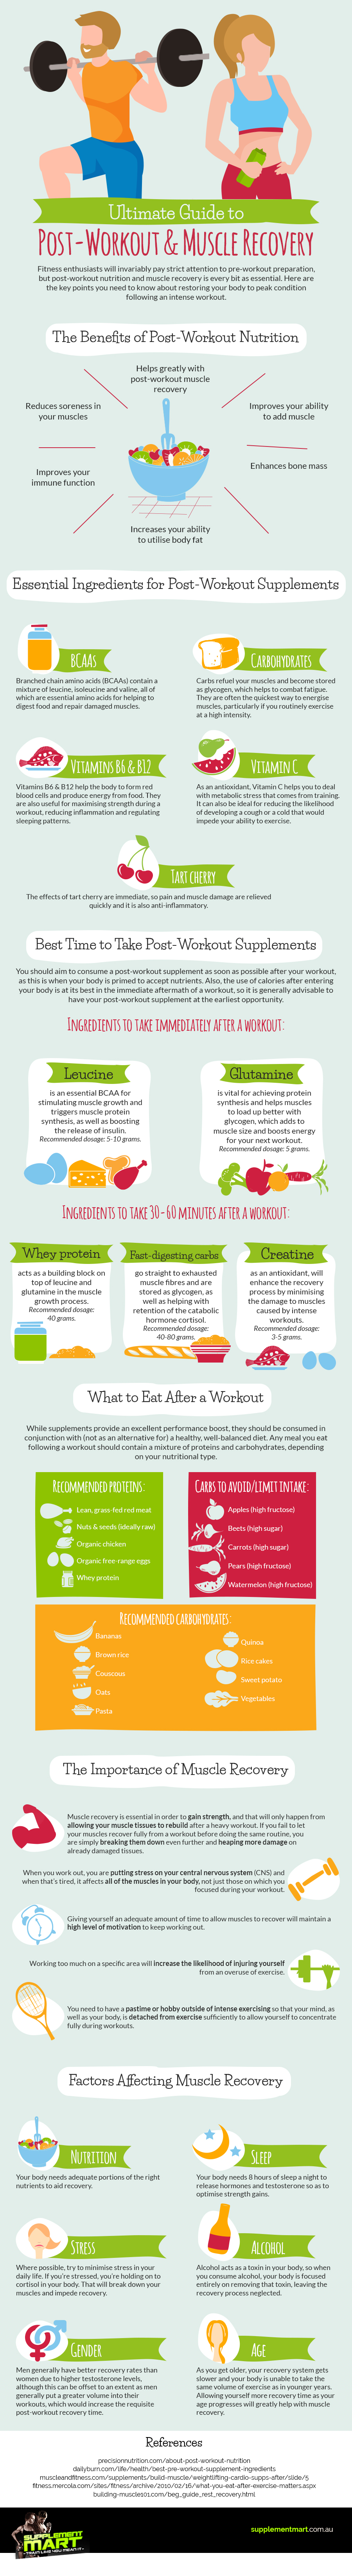 Guide-to-Post-Workout-Muscle-Recovery-Infographic